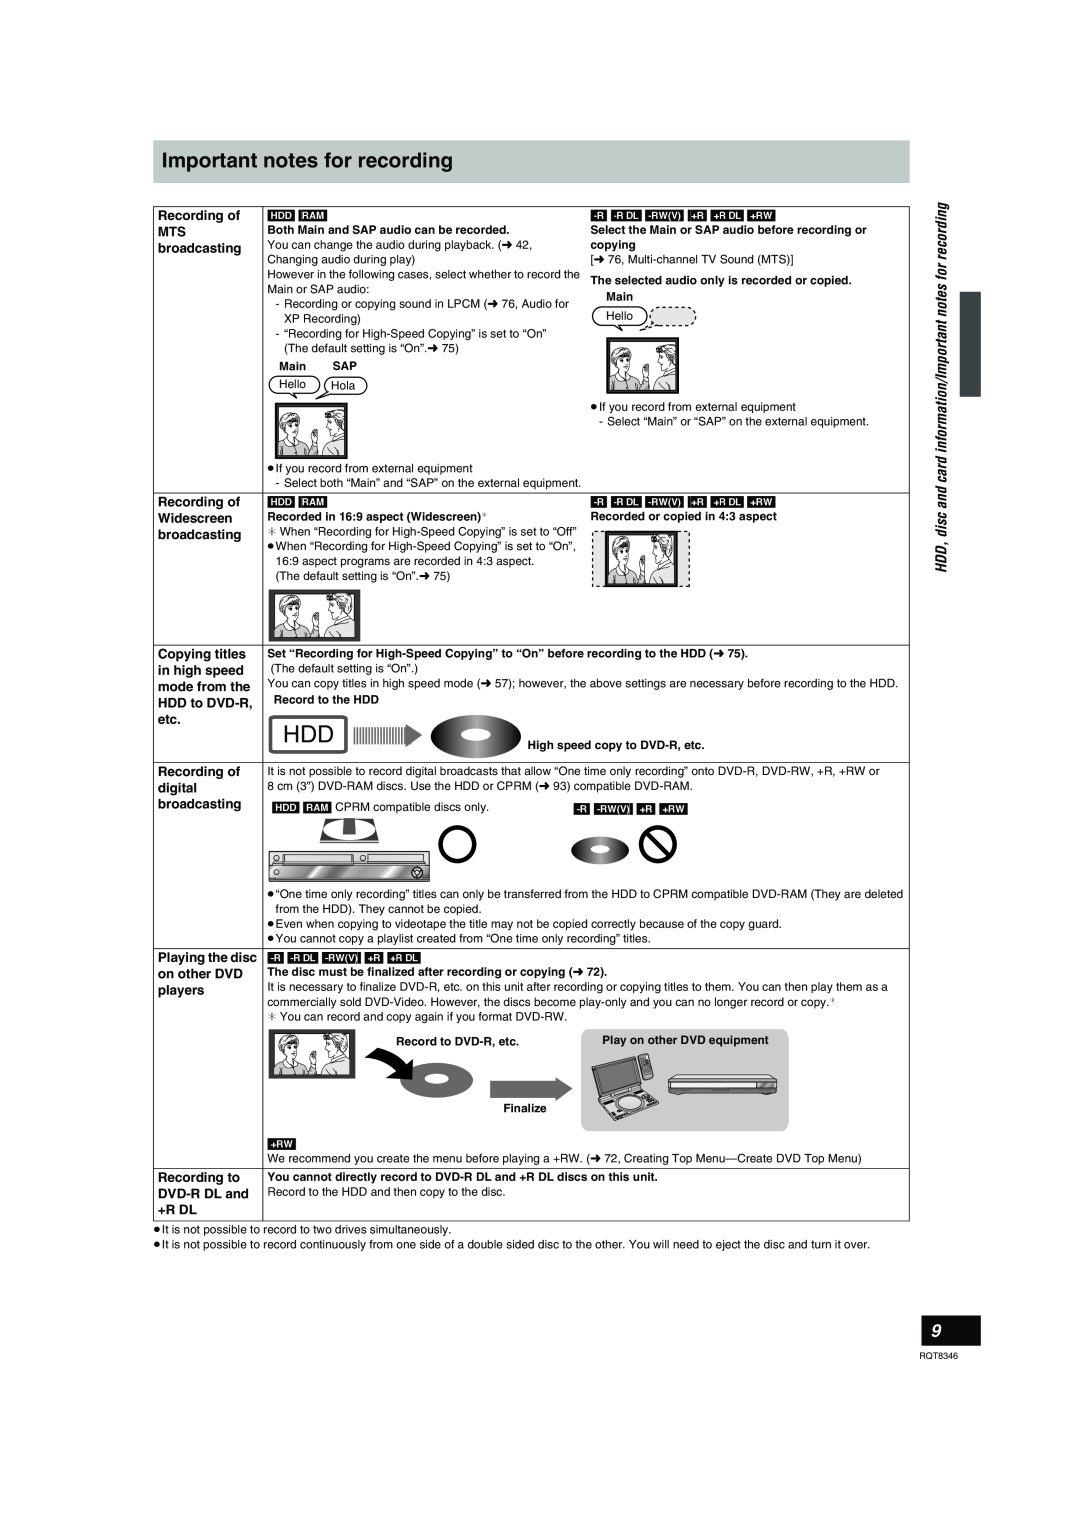 Panasonic DMR-EH75V HDD, disc and card information/Important notes for recording, Recording of, broadcasting, digital 